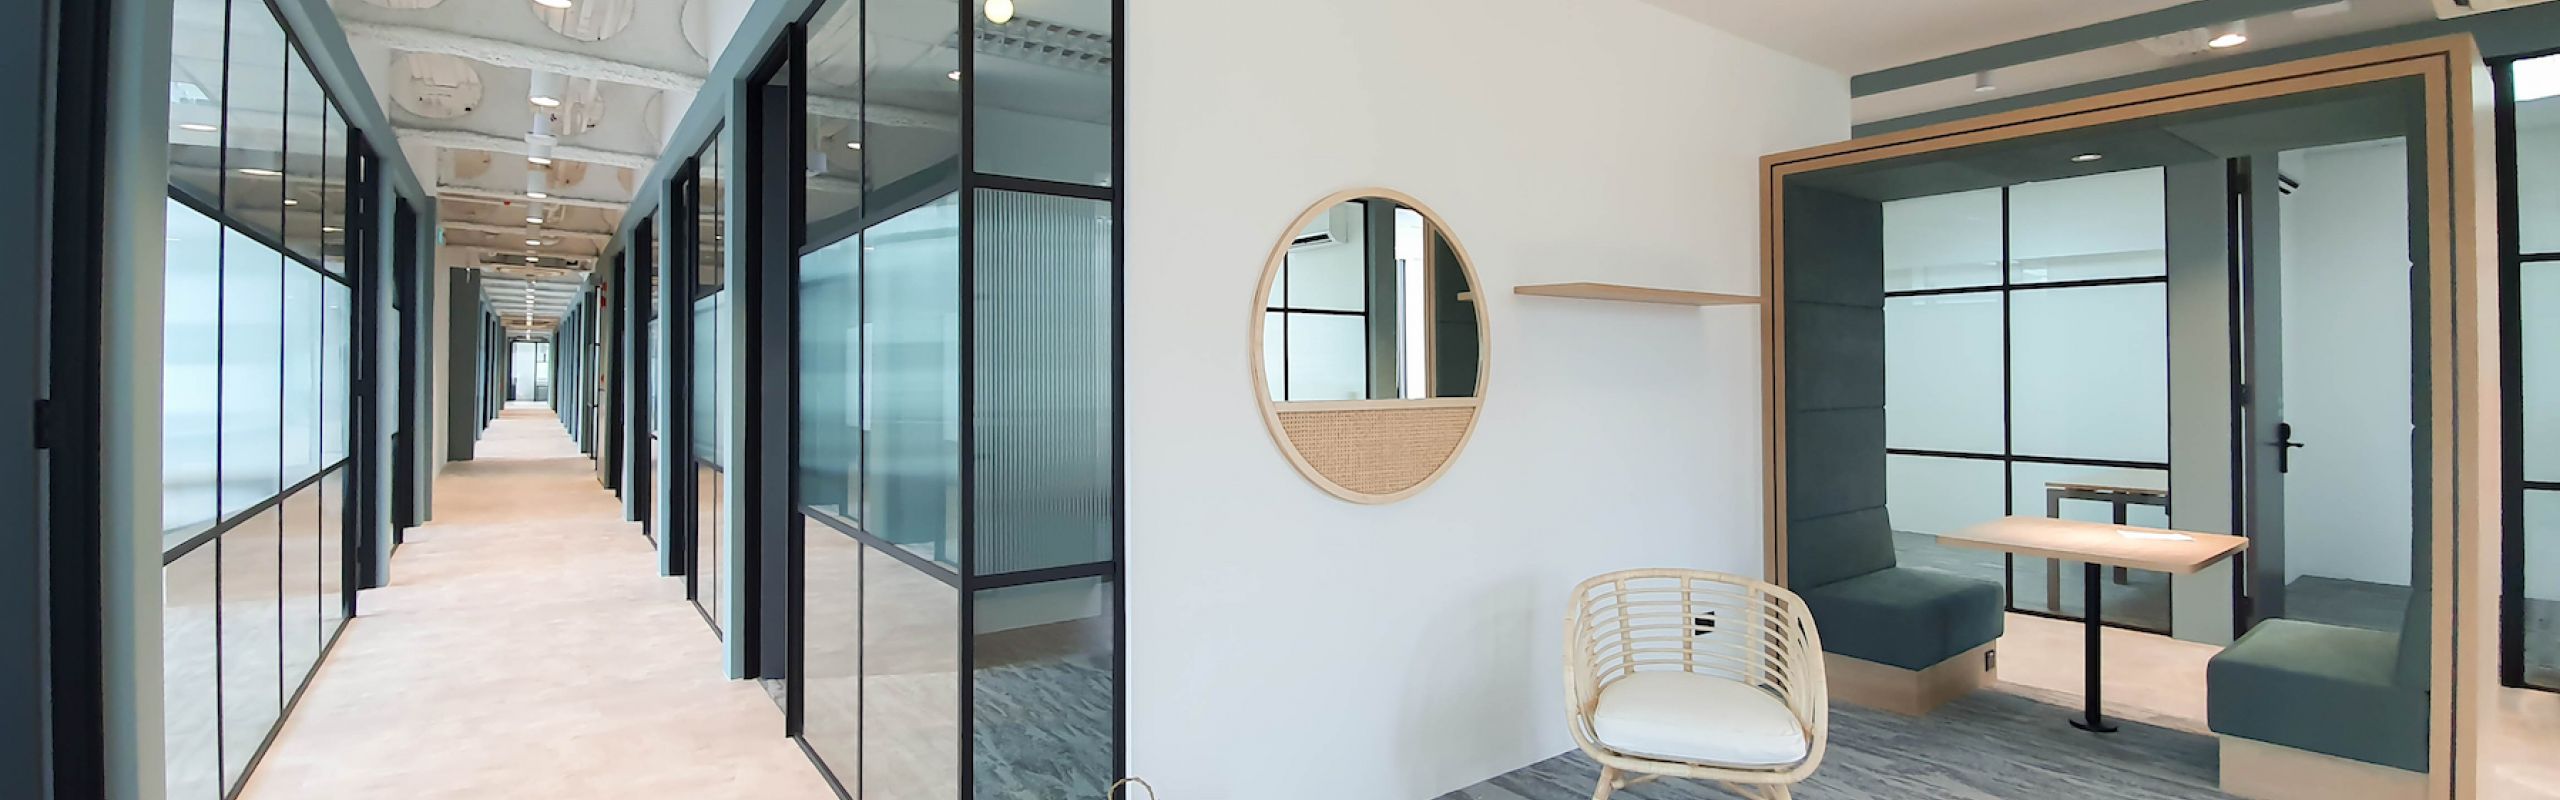 Utilizing Elegant Glass Partitions for Co-working Space